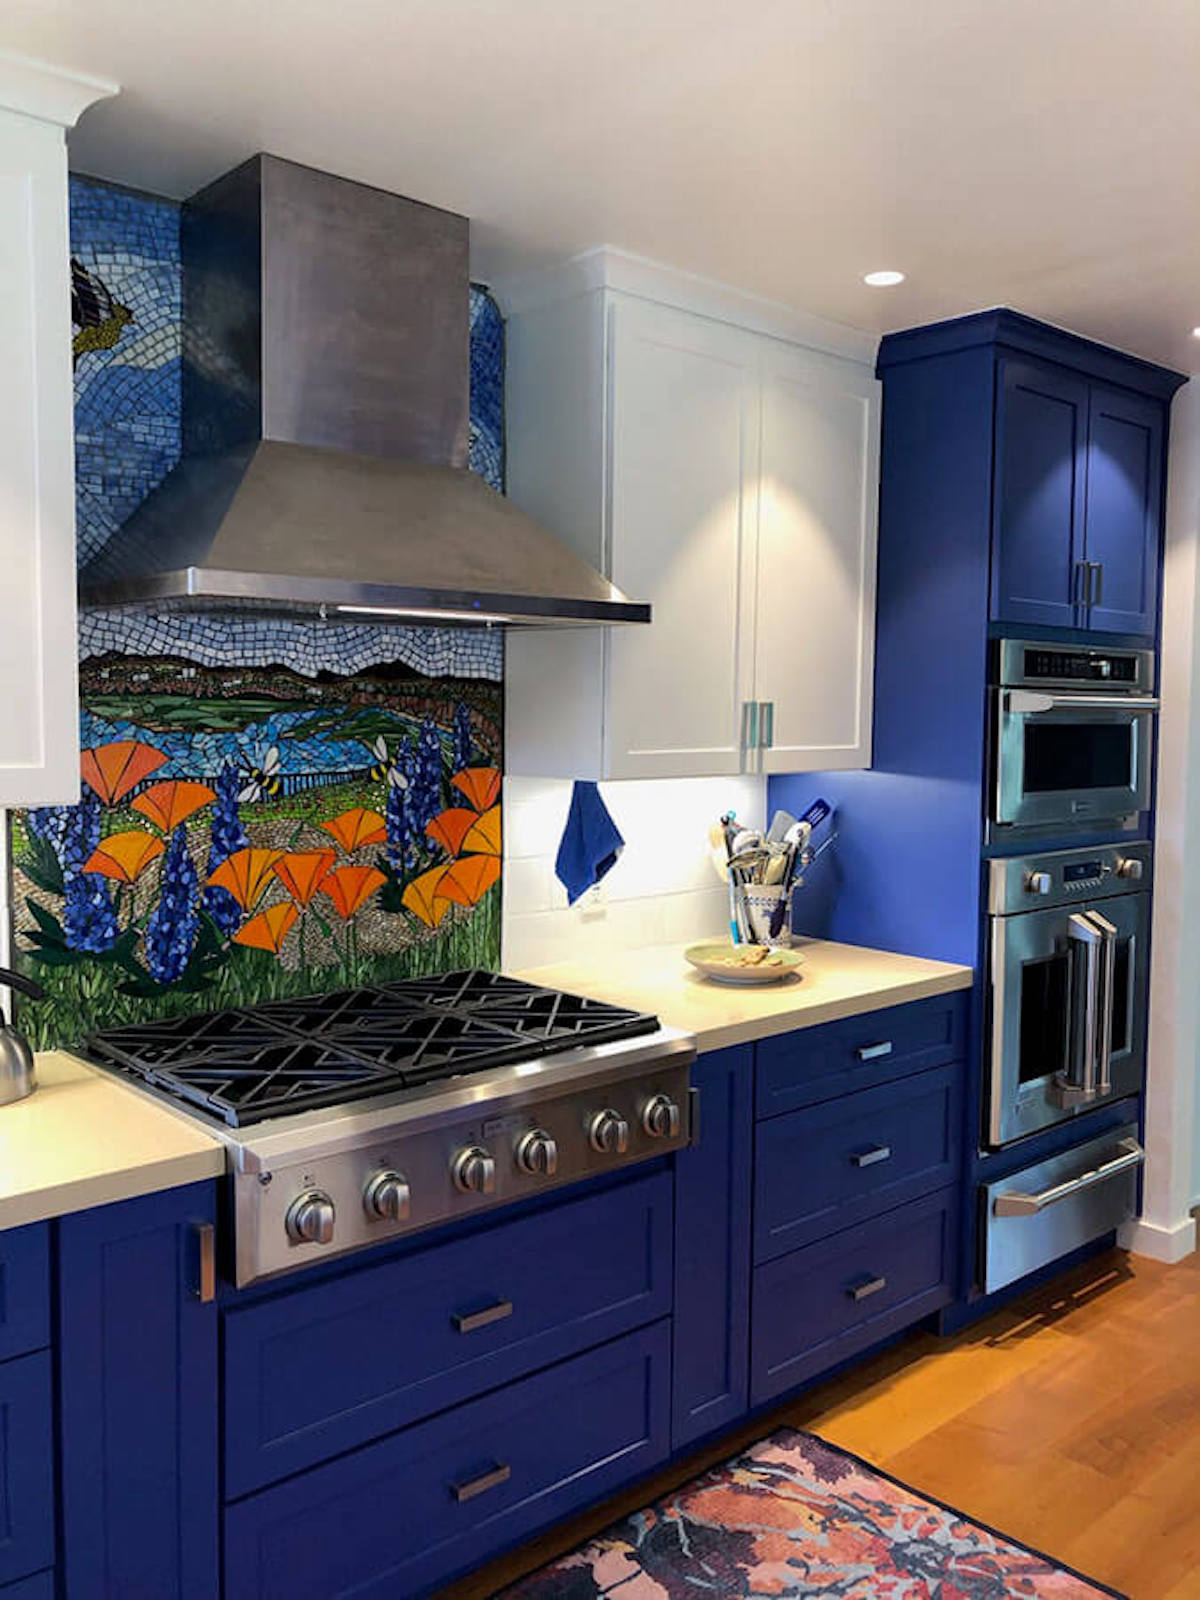 A blue and white themed kitchen featuring a meadow mosaic backsplash.